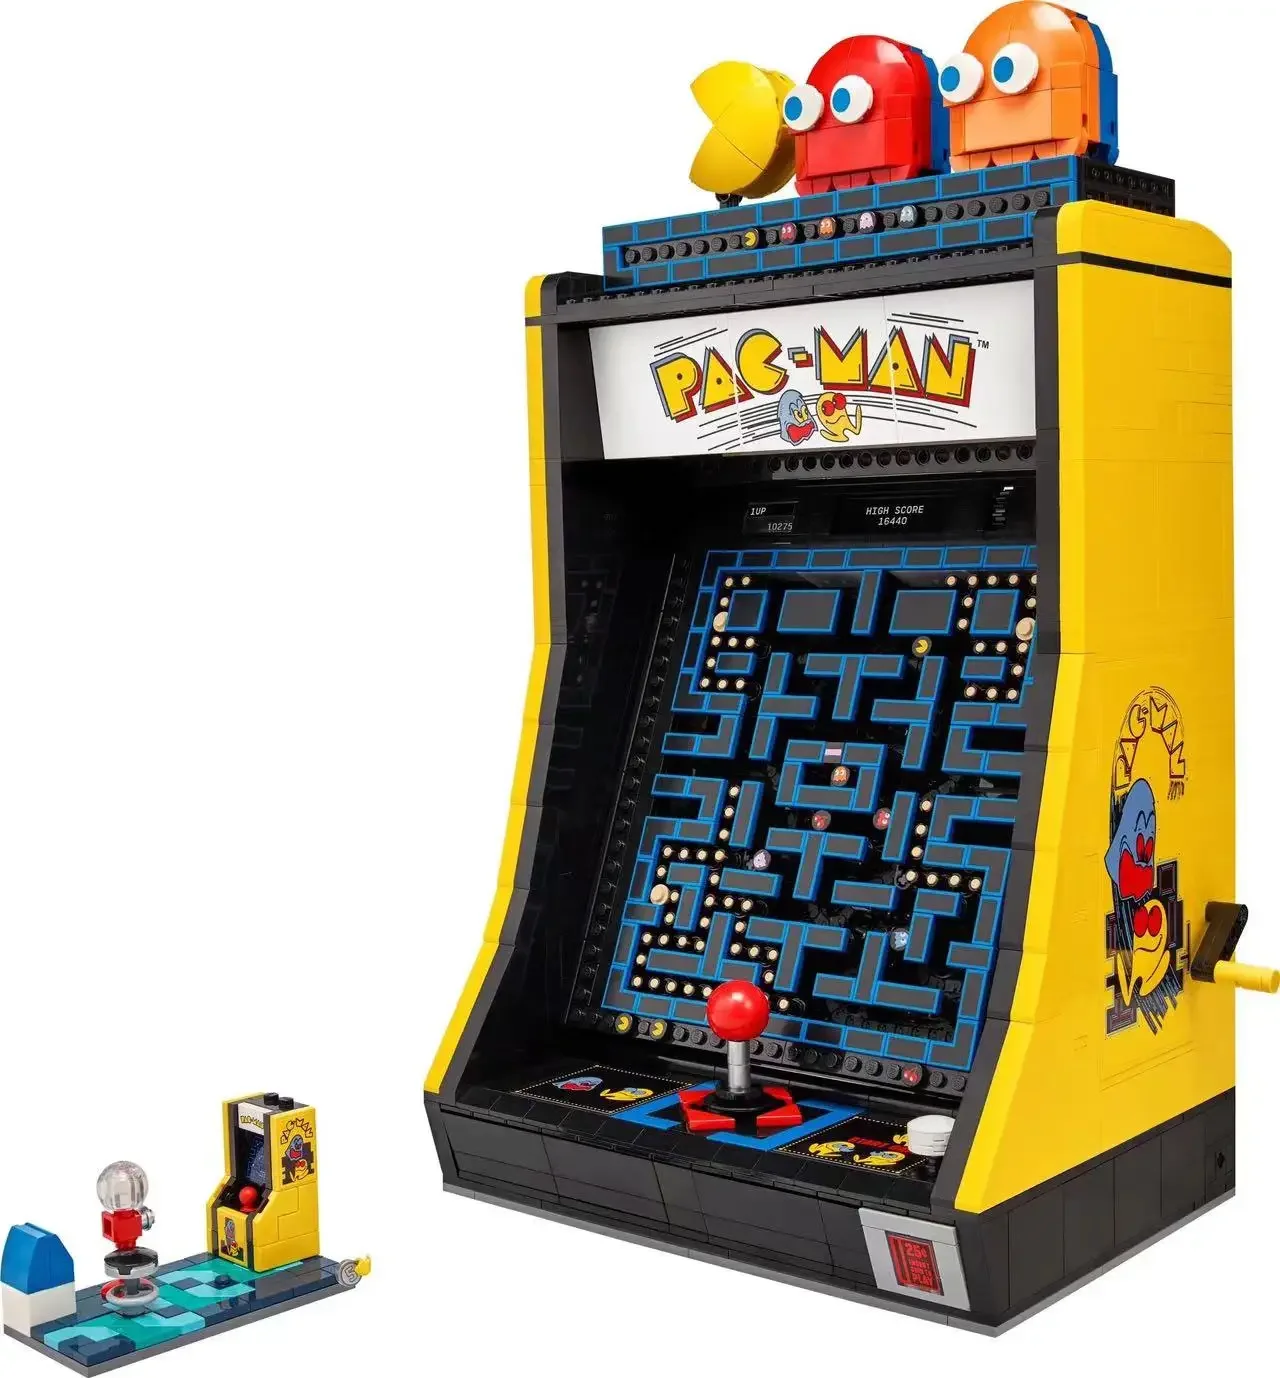 

2651pcs 10323 Pac-Man Arcade Cabinet Compatible ICONS Model Building Blocks Assembly Bricks Toy for Children Christmas Gifts